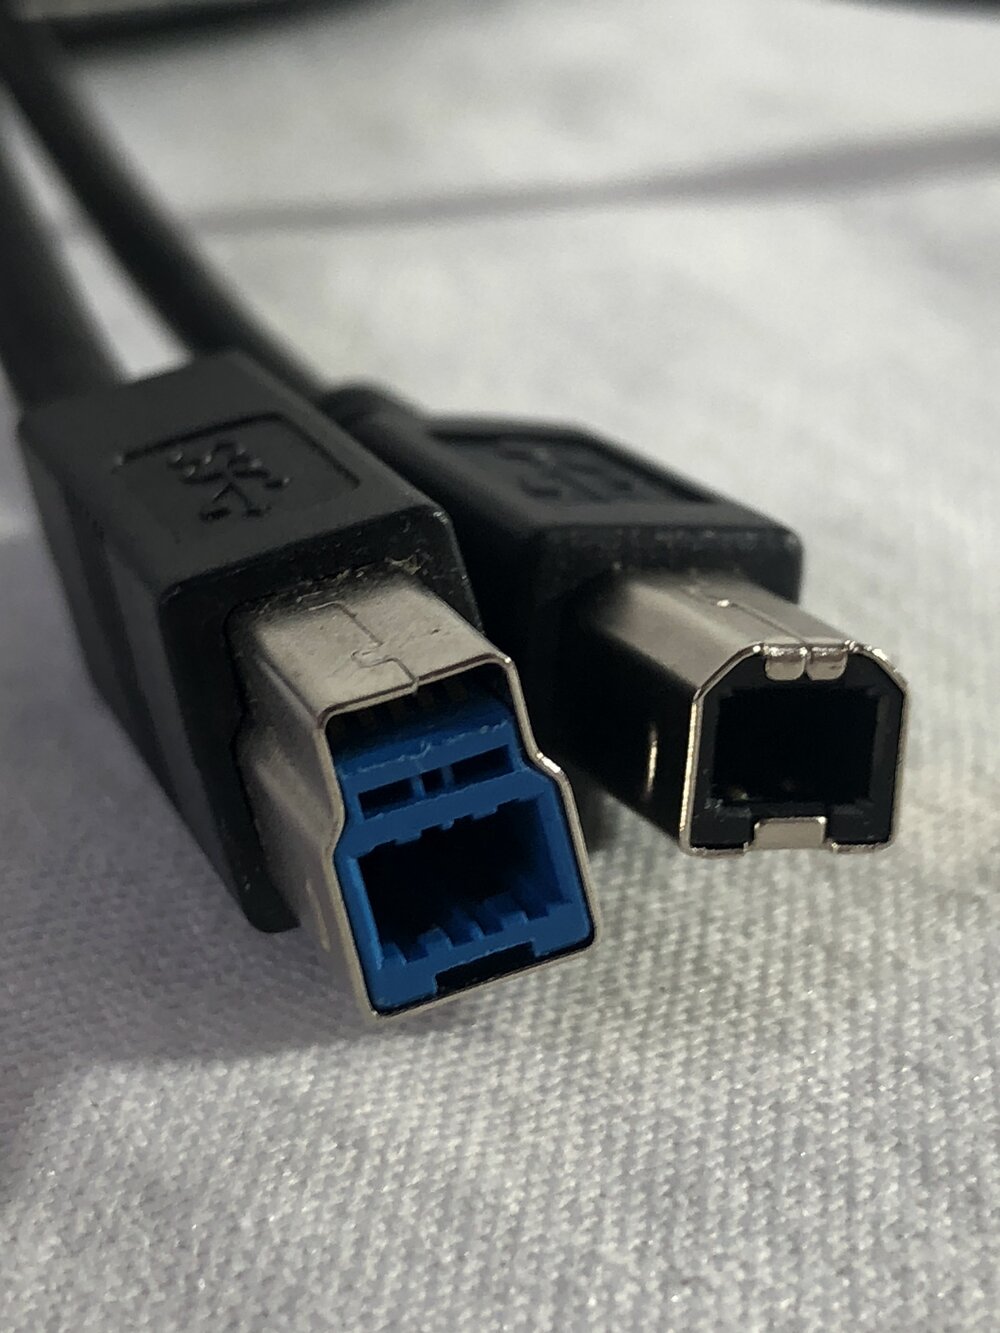 tjære sagging Fellow USB-A to USB-B Cable (2.0 or 3.0 Available) — Free Geek Twin Cities